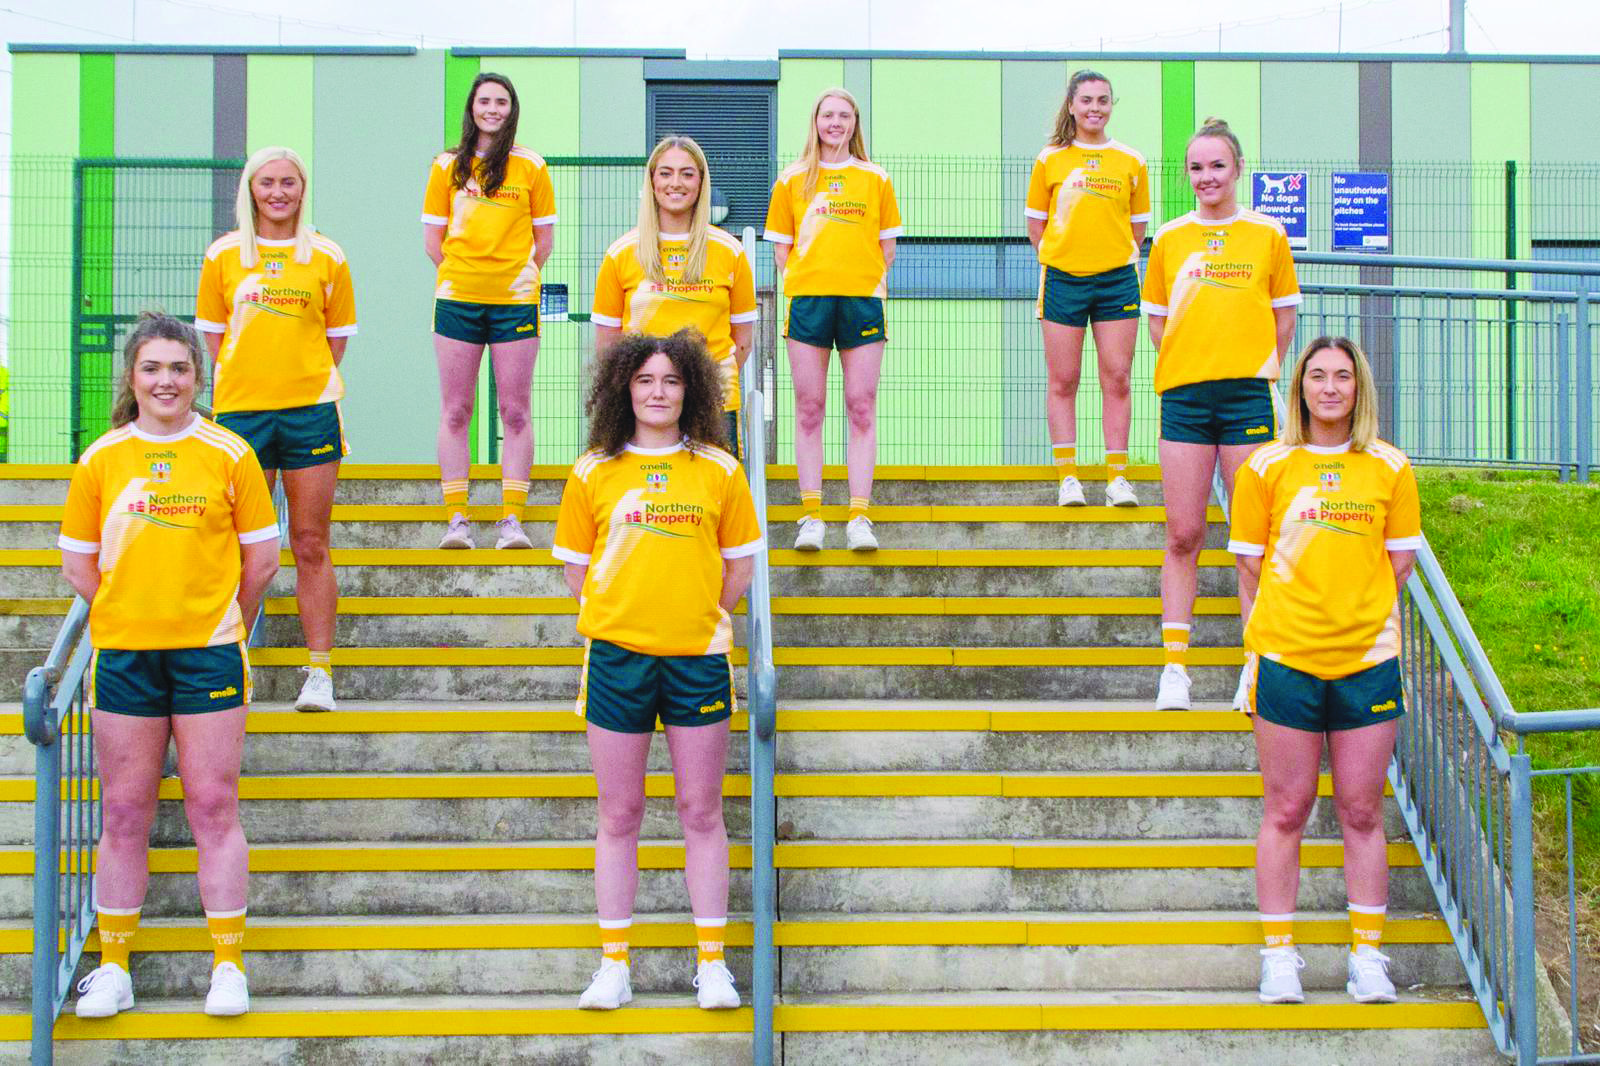  Members of the Antrim team ahead of Sunday’s trip to Derry in their new kit     